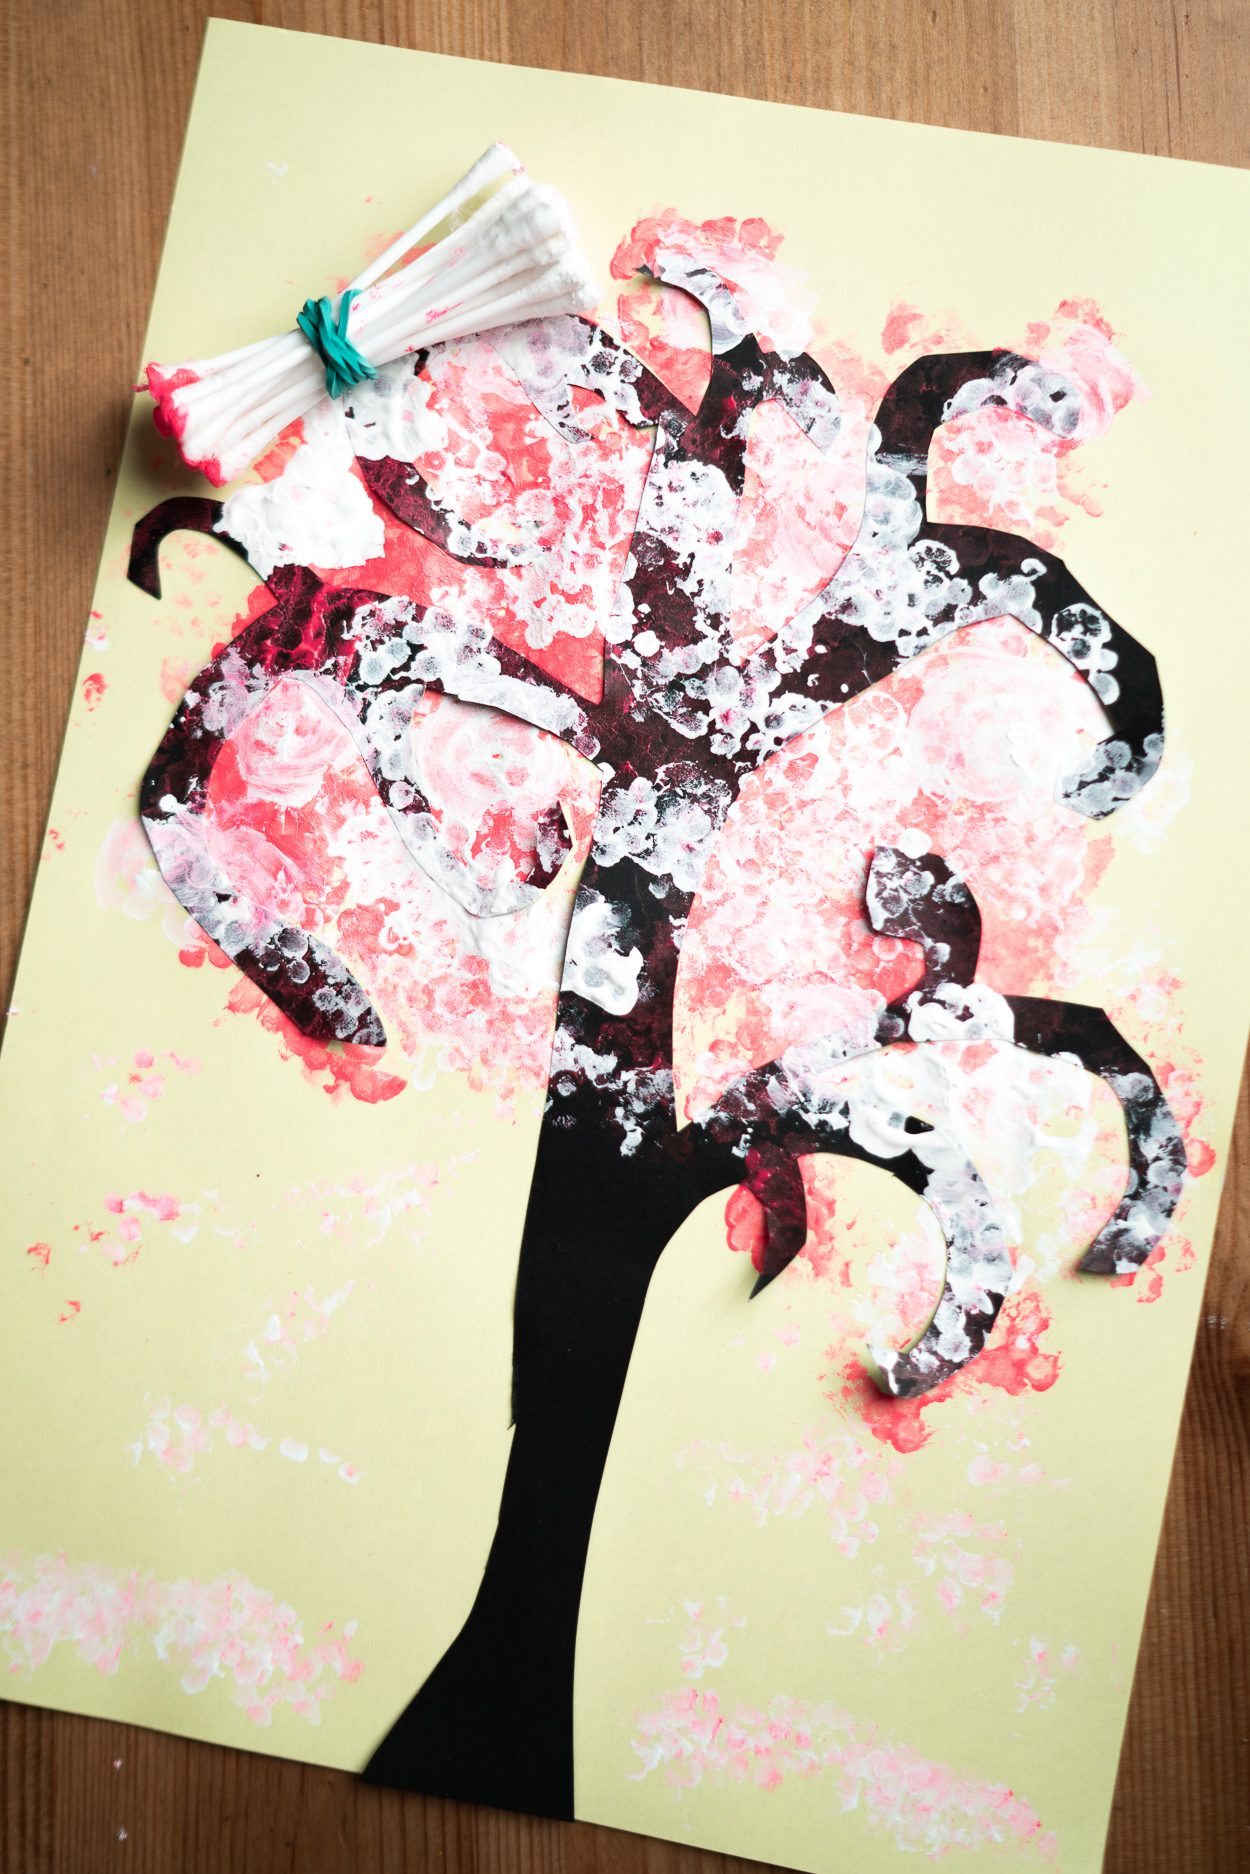 Painting With Cotton Buds
Take a black sheet of paper and draw a tree with a pencil, cut it out. Glue the tree to a blue sheet, take a bunch of cotton buds, secure them with an elastic. Dip the buds into pink paint and stamp them on the tree and all around to imitate blooms. Add some white ‘blooms’, too, using white paint.